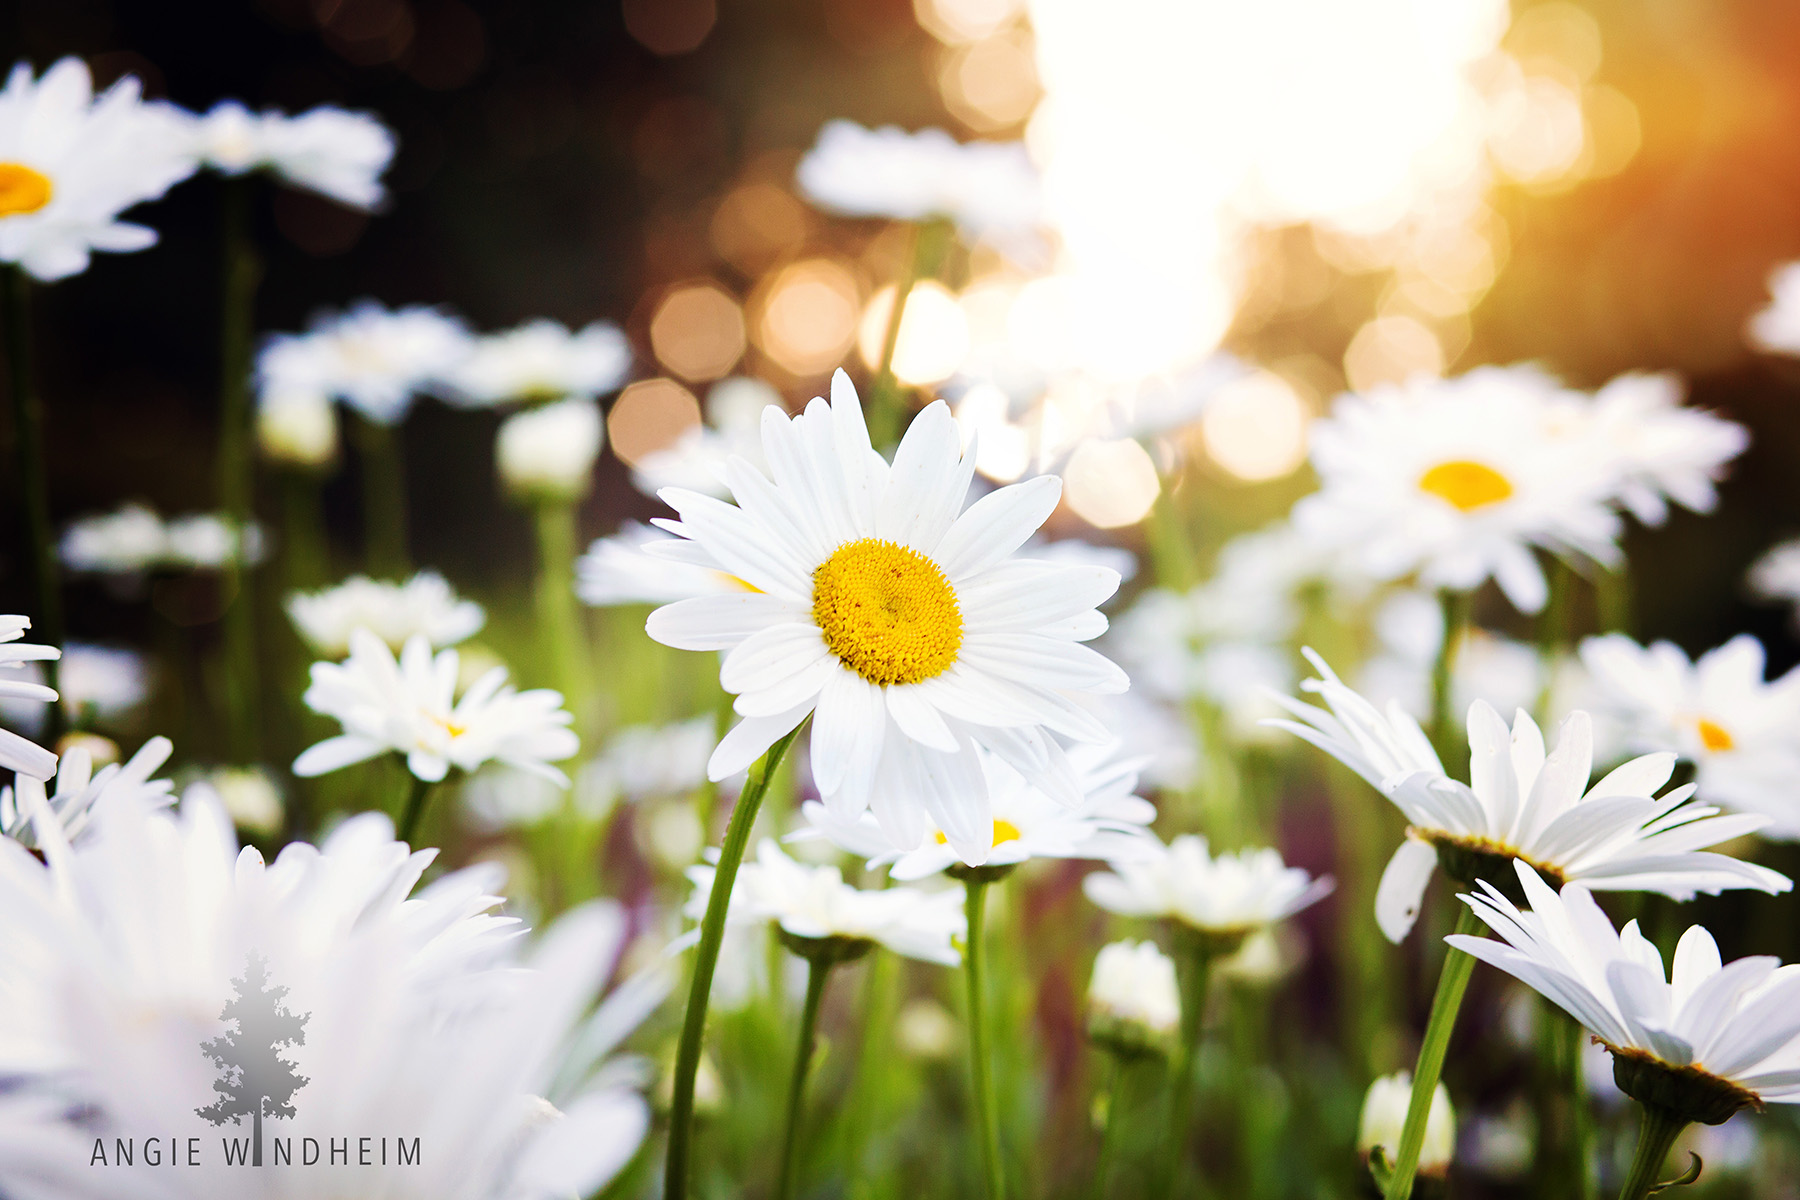 Photography of wild daisy field with one flower in focus and the sunset sparkling behind it.